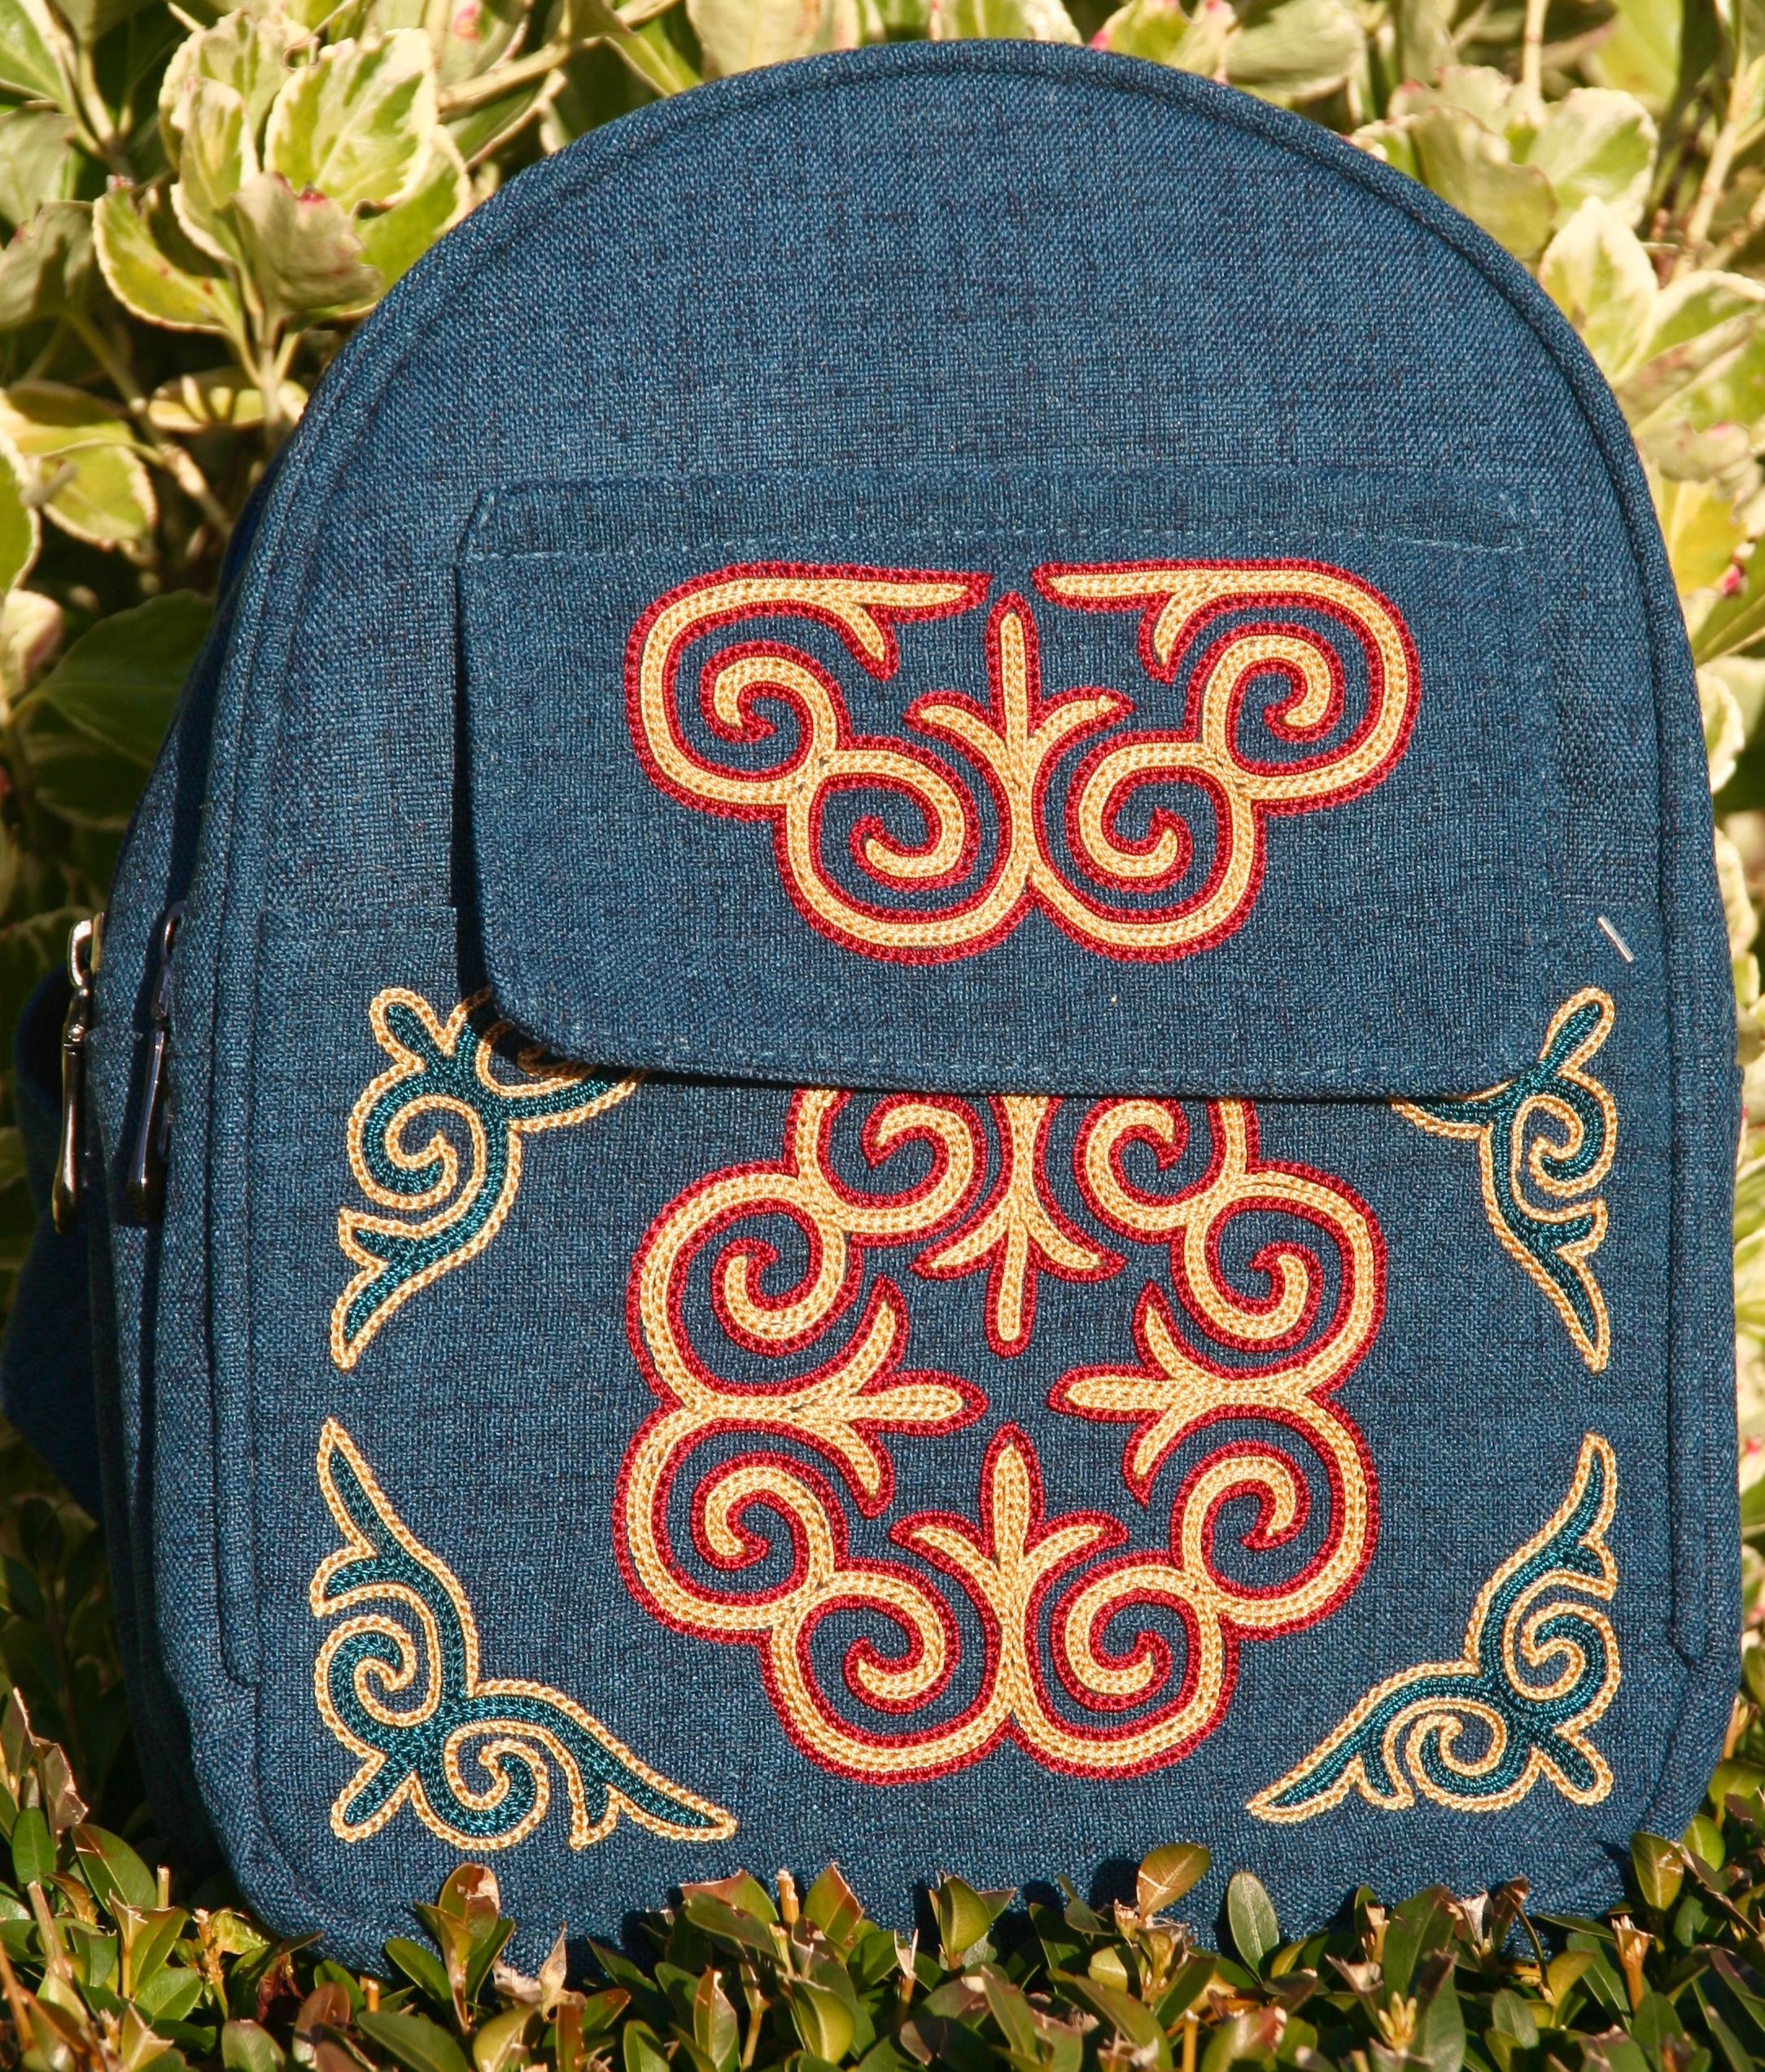 Fair-trade Handmade Mongolian mini backpack Mid blue material Red and Gold embroidery using traditional Kazakh motifs